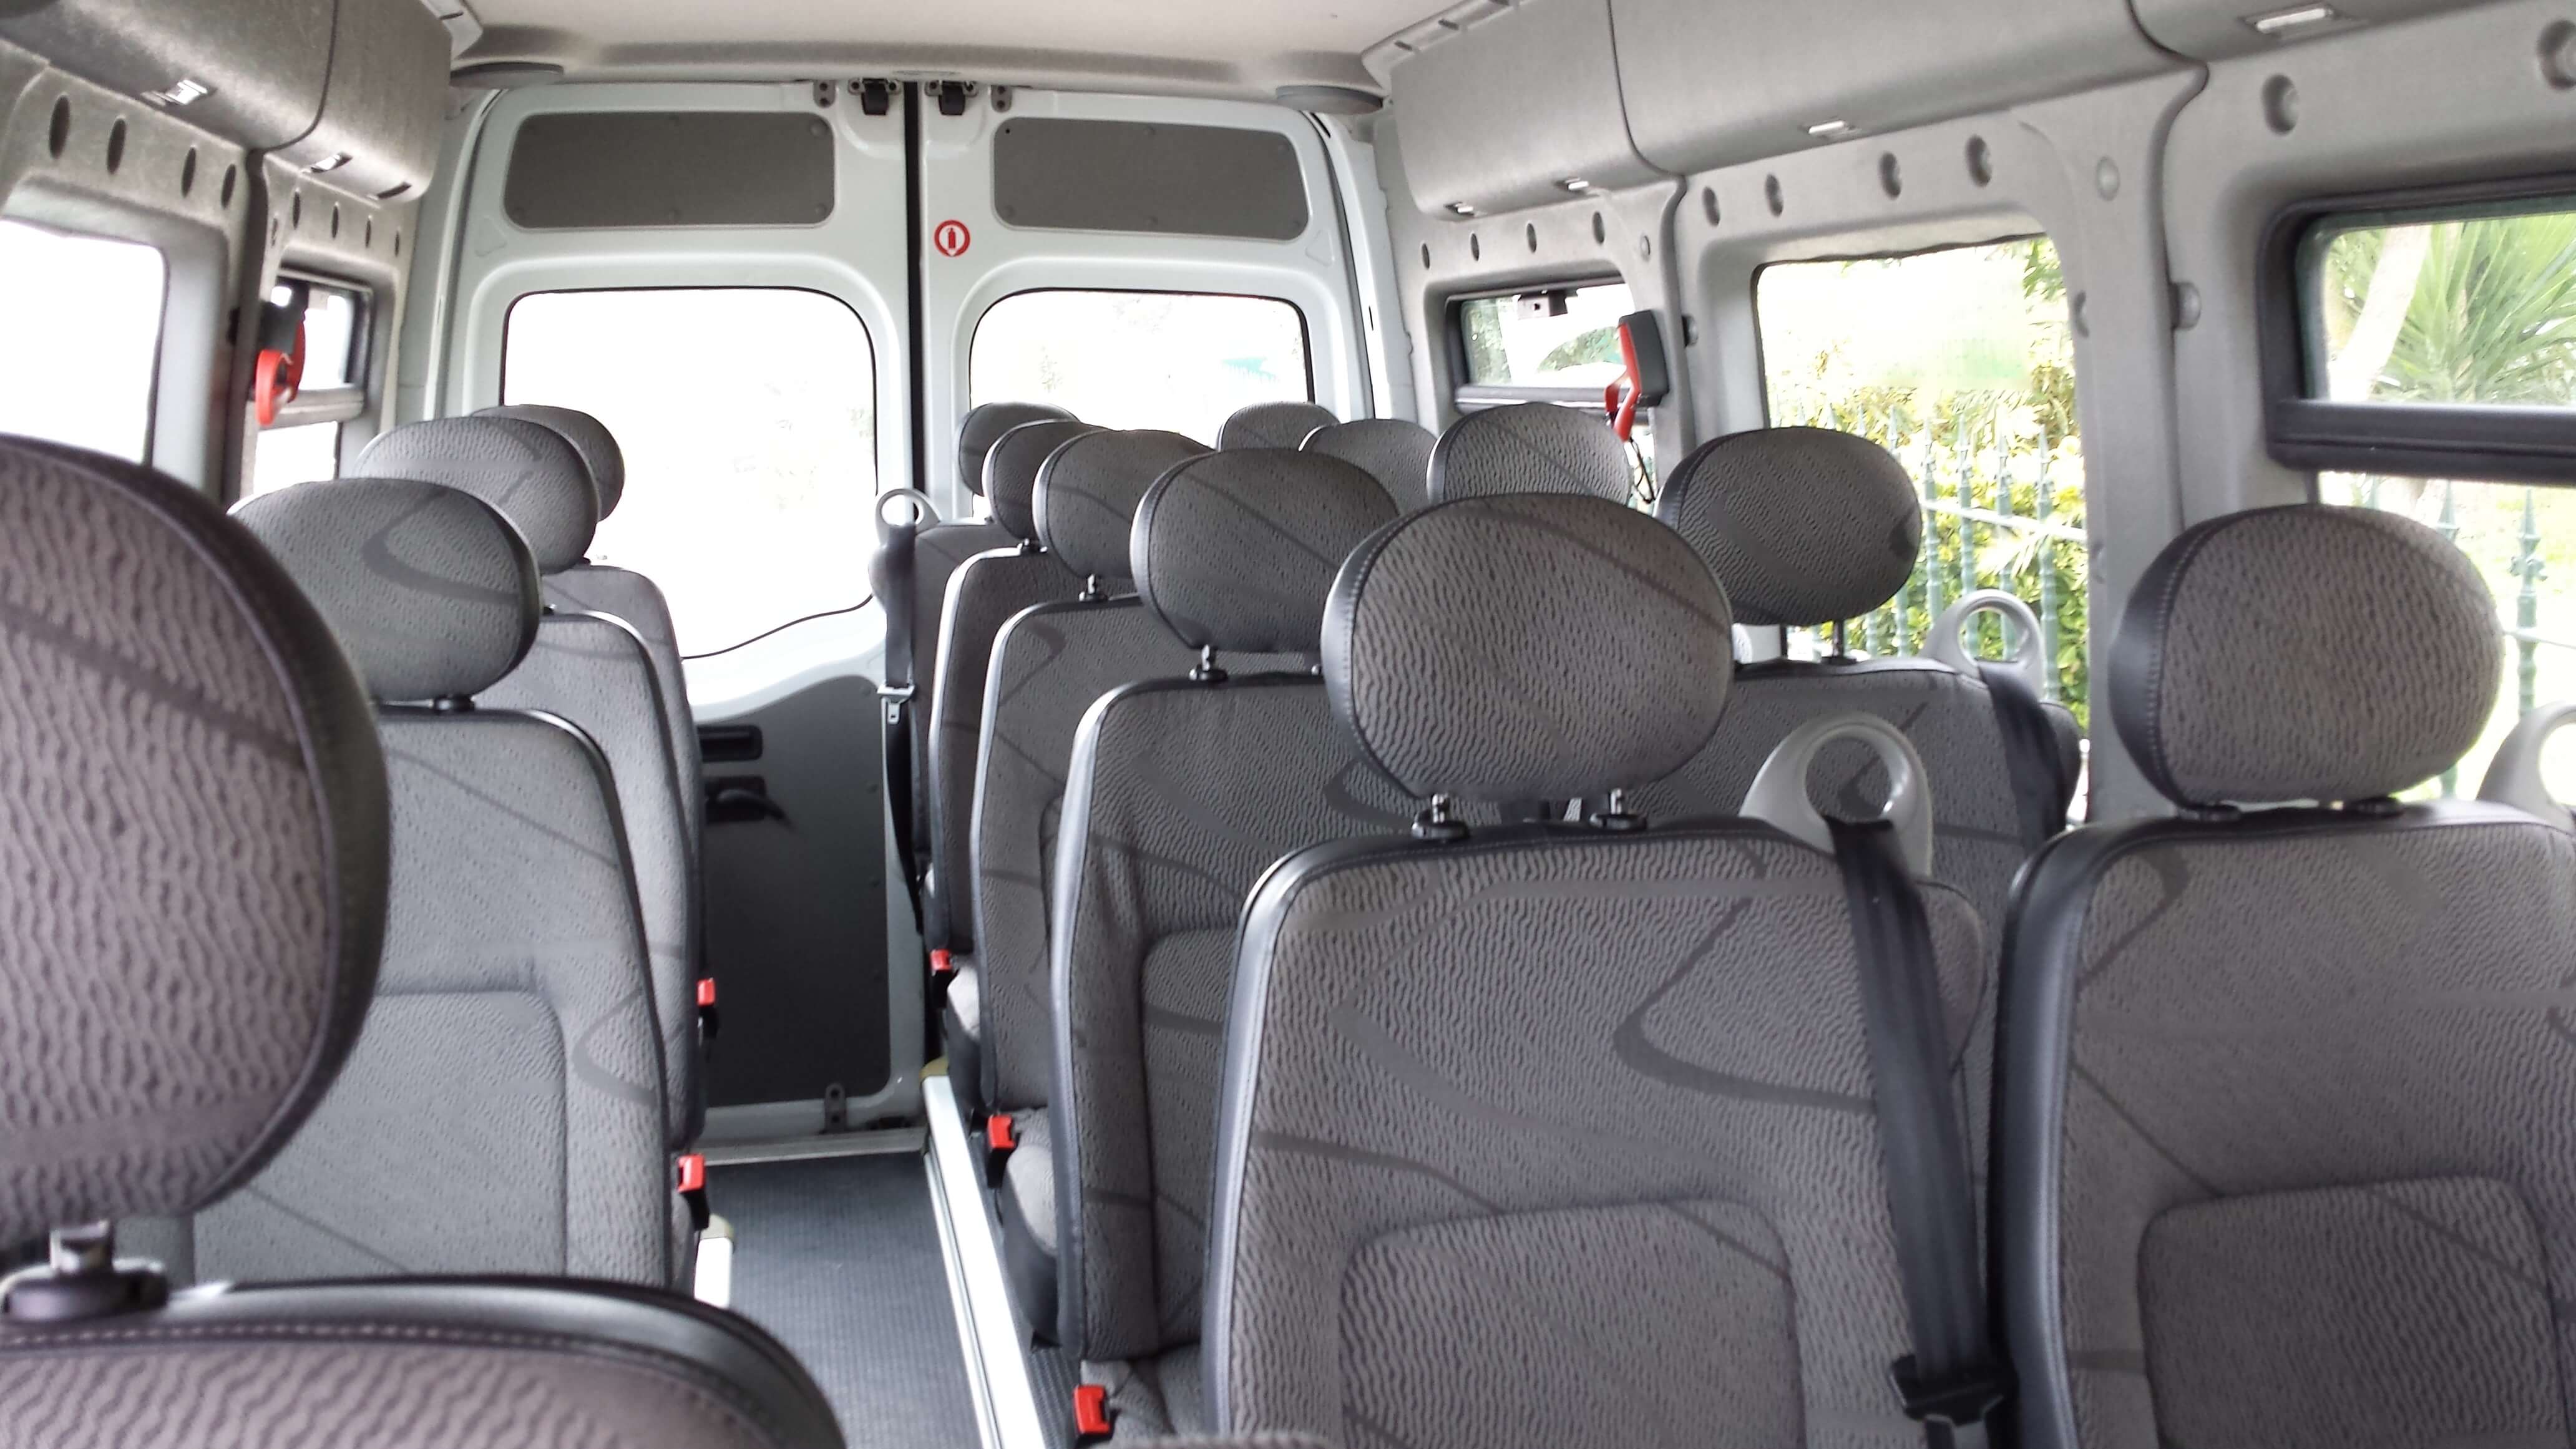 Rent a 15 seater Minibus  (Renault  Master 2008) from Trax Shuttle Services from Lisbon District 